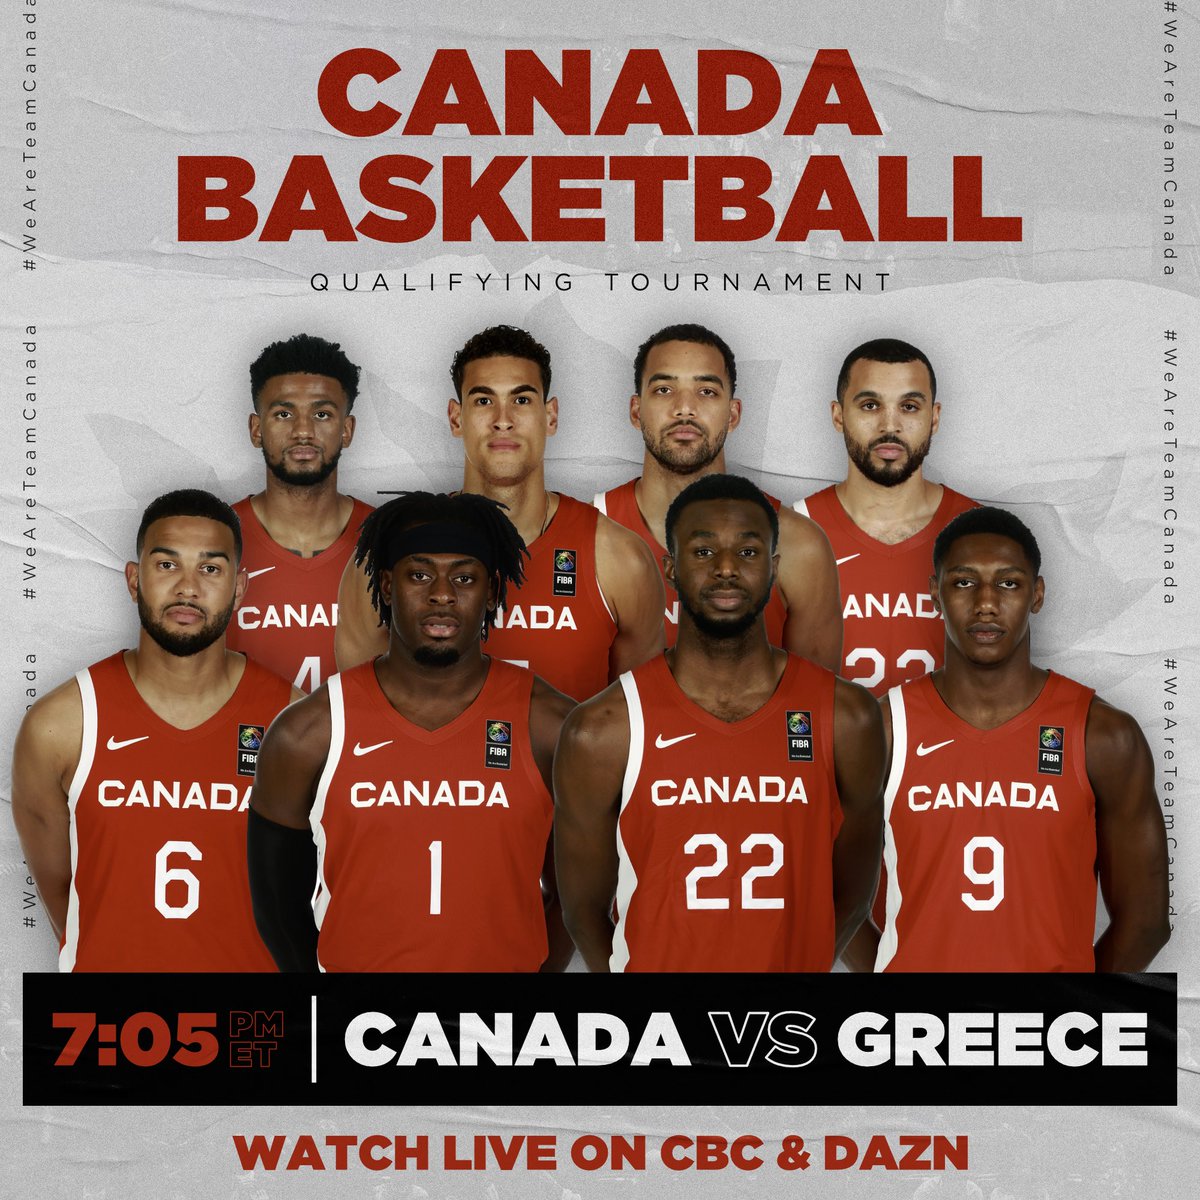 Watch Canada & Greece face-off TONIGHT (7:05 PM/ET) in the Qualifying Tournament on CBC and DAZN! 🇨🇦

#WeAreTeamCanada